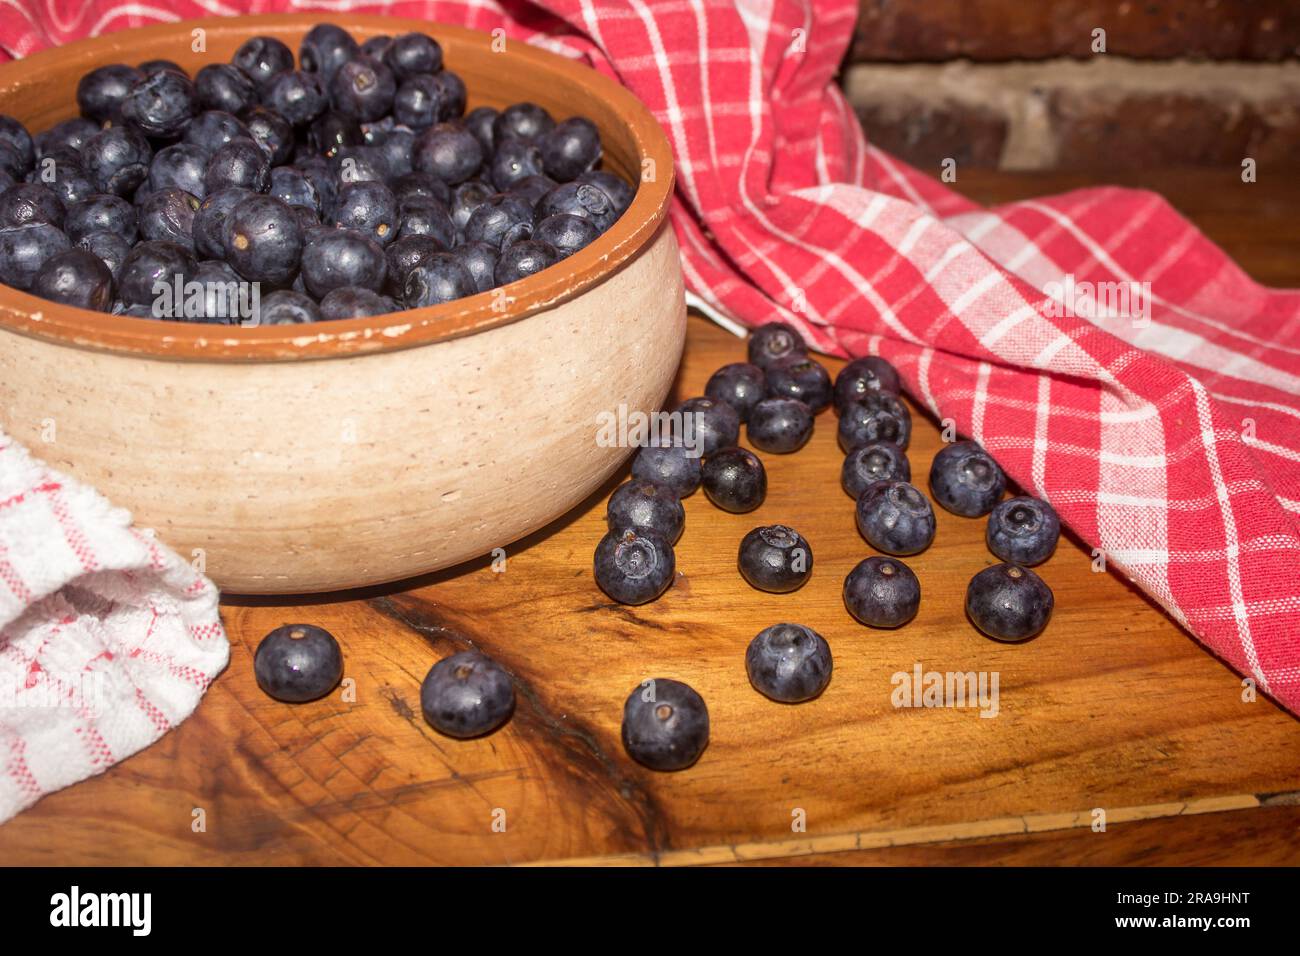 A rustic bowl filled with blueberries Stock Photo